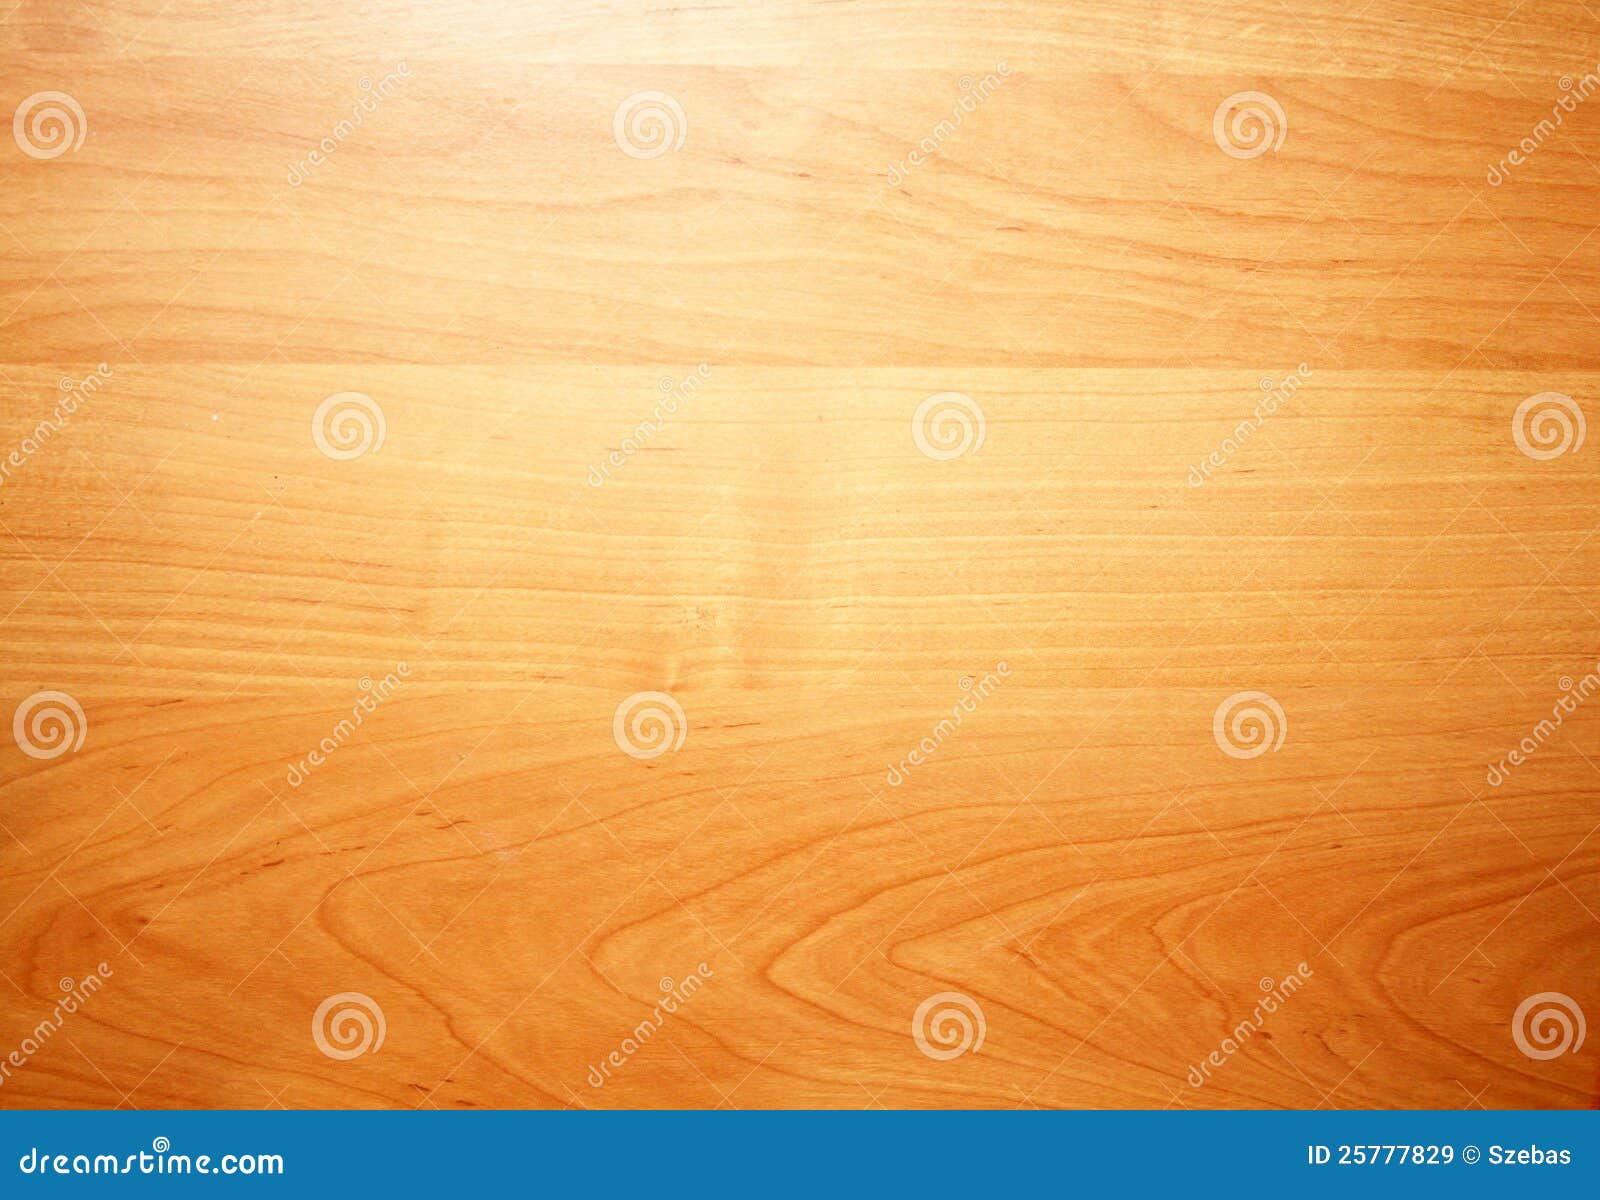 Wood Texture Stock Image Image Of Gloss Desk Timber 25777829